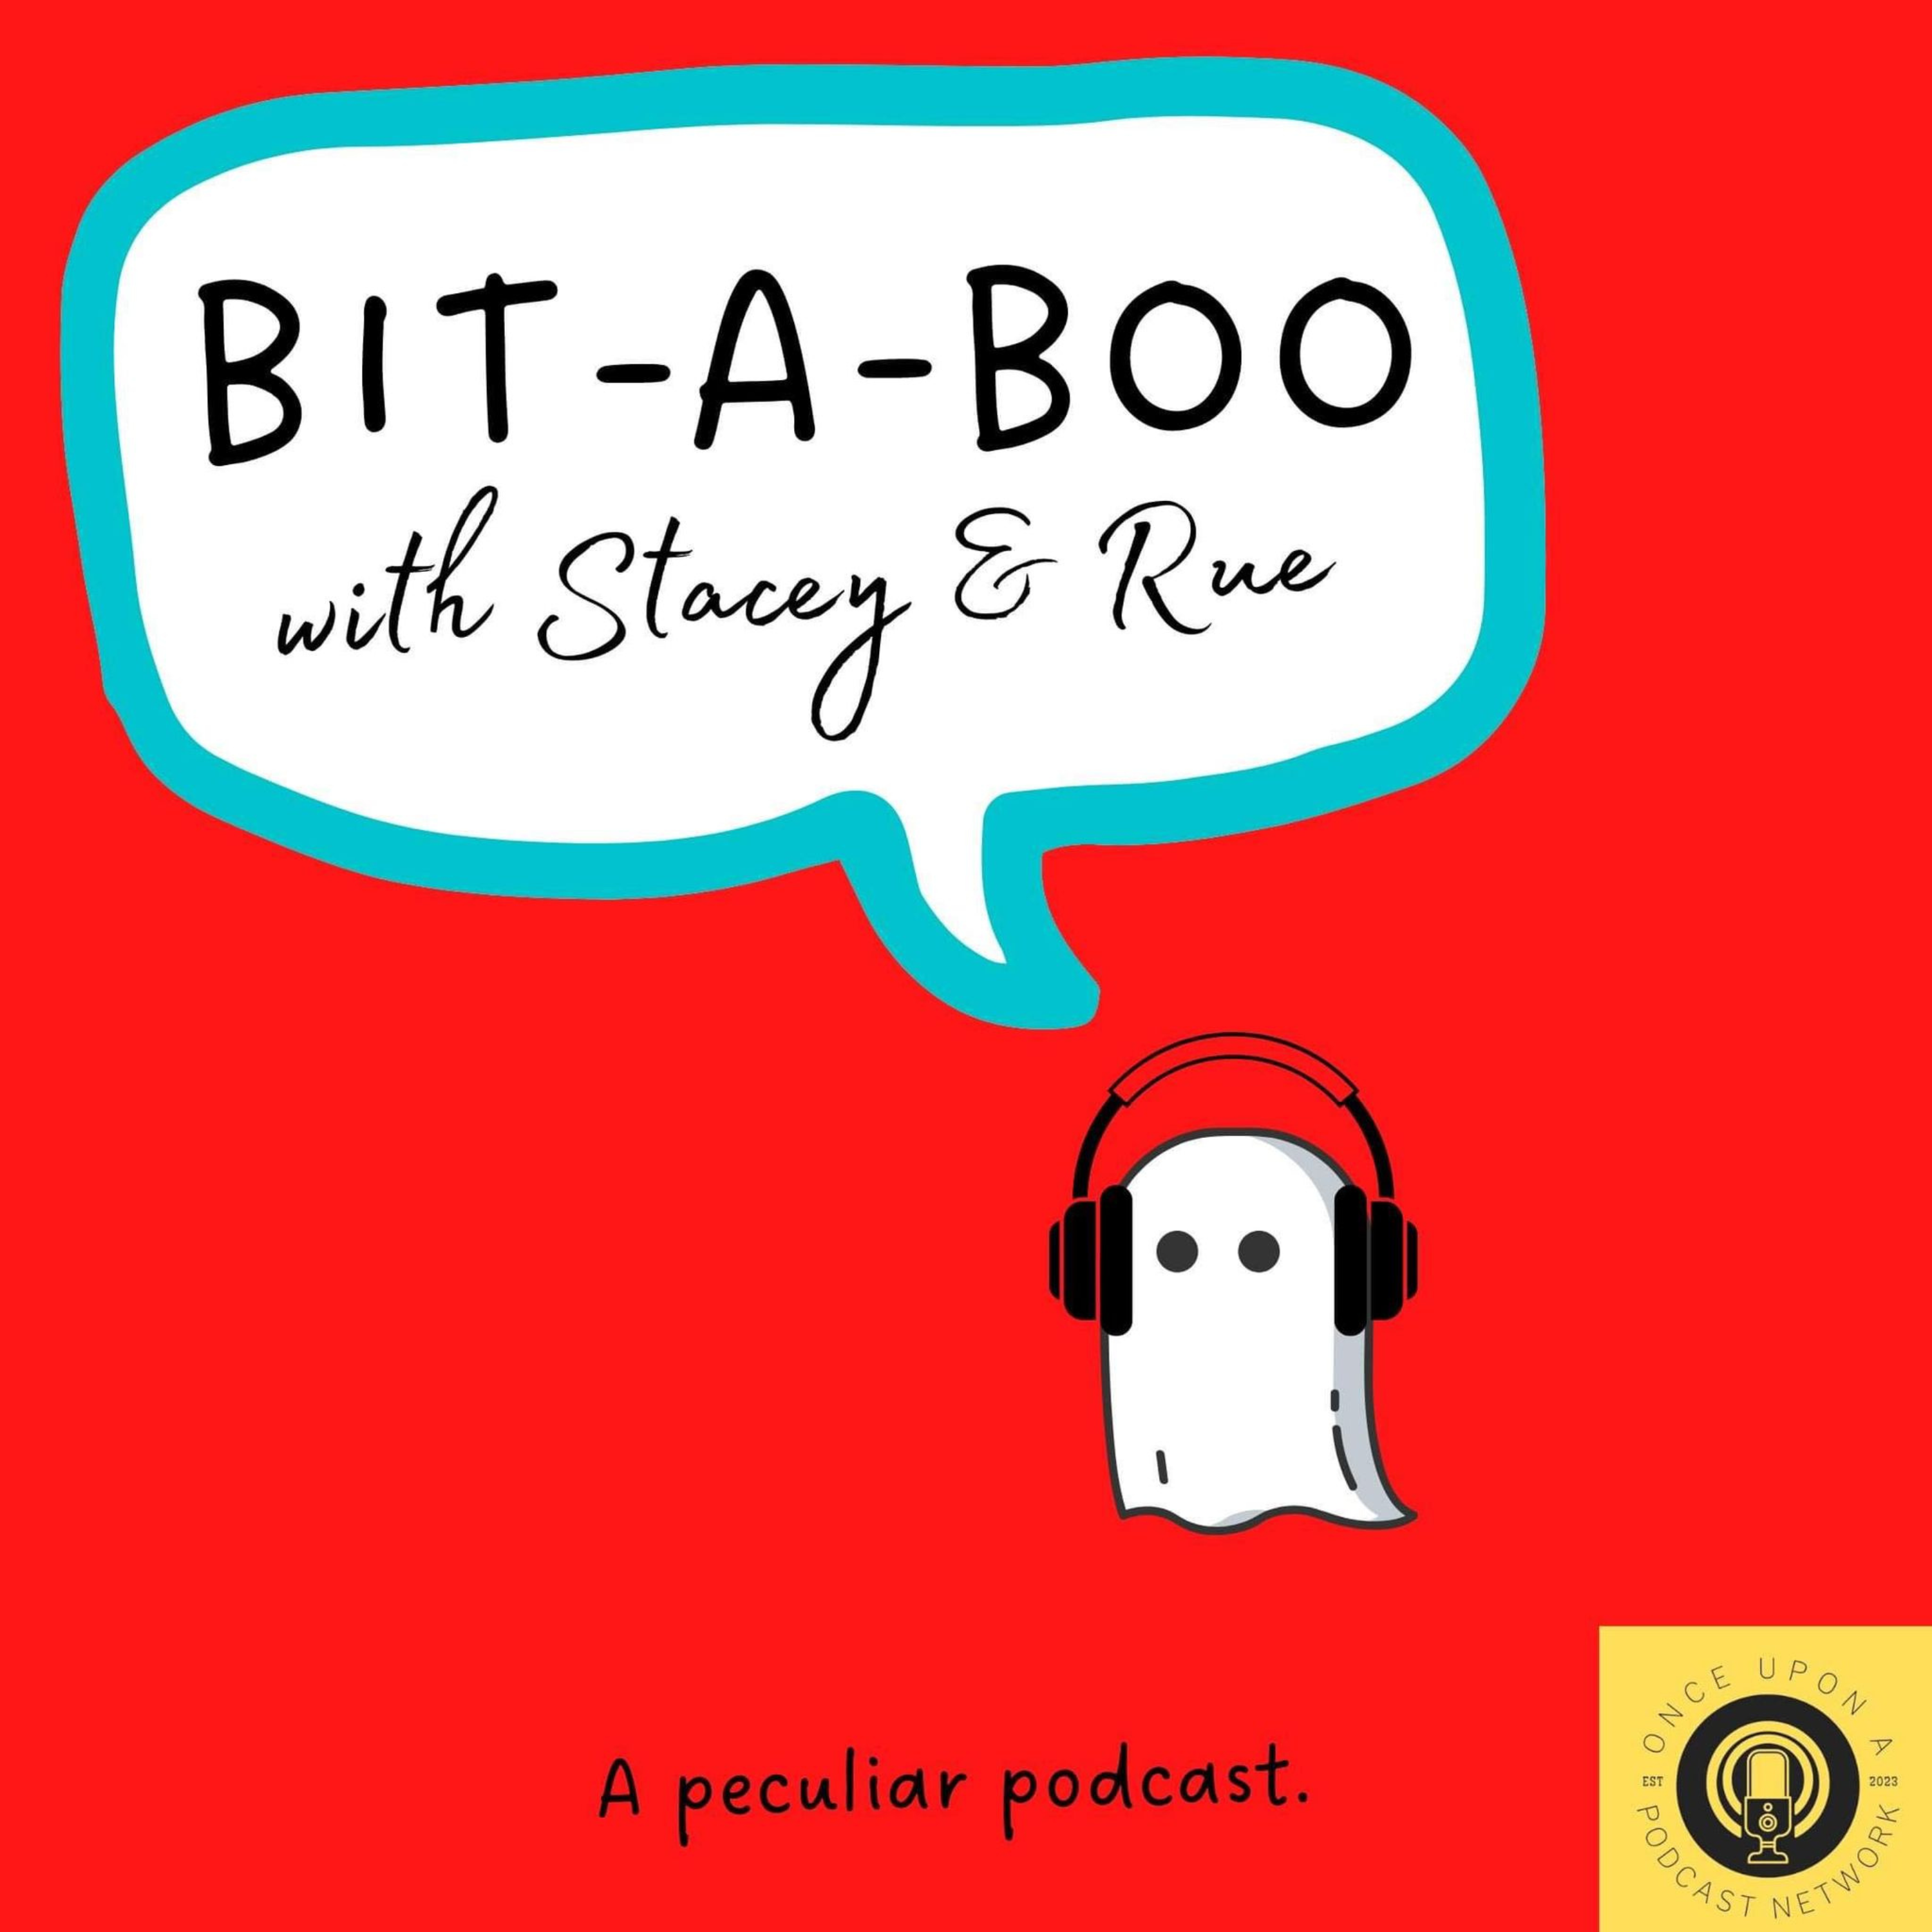 Bit-A-Boo with Stacey & Rue